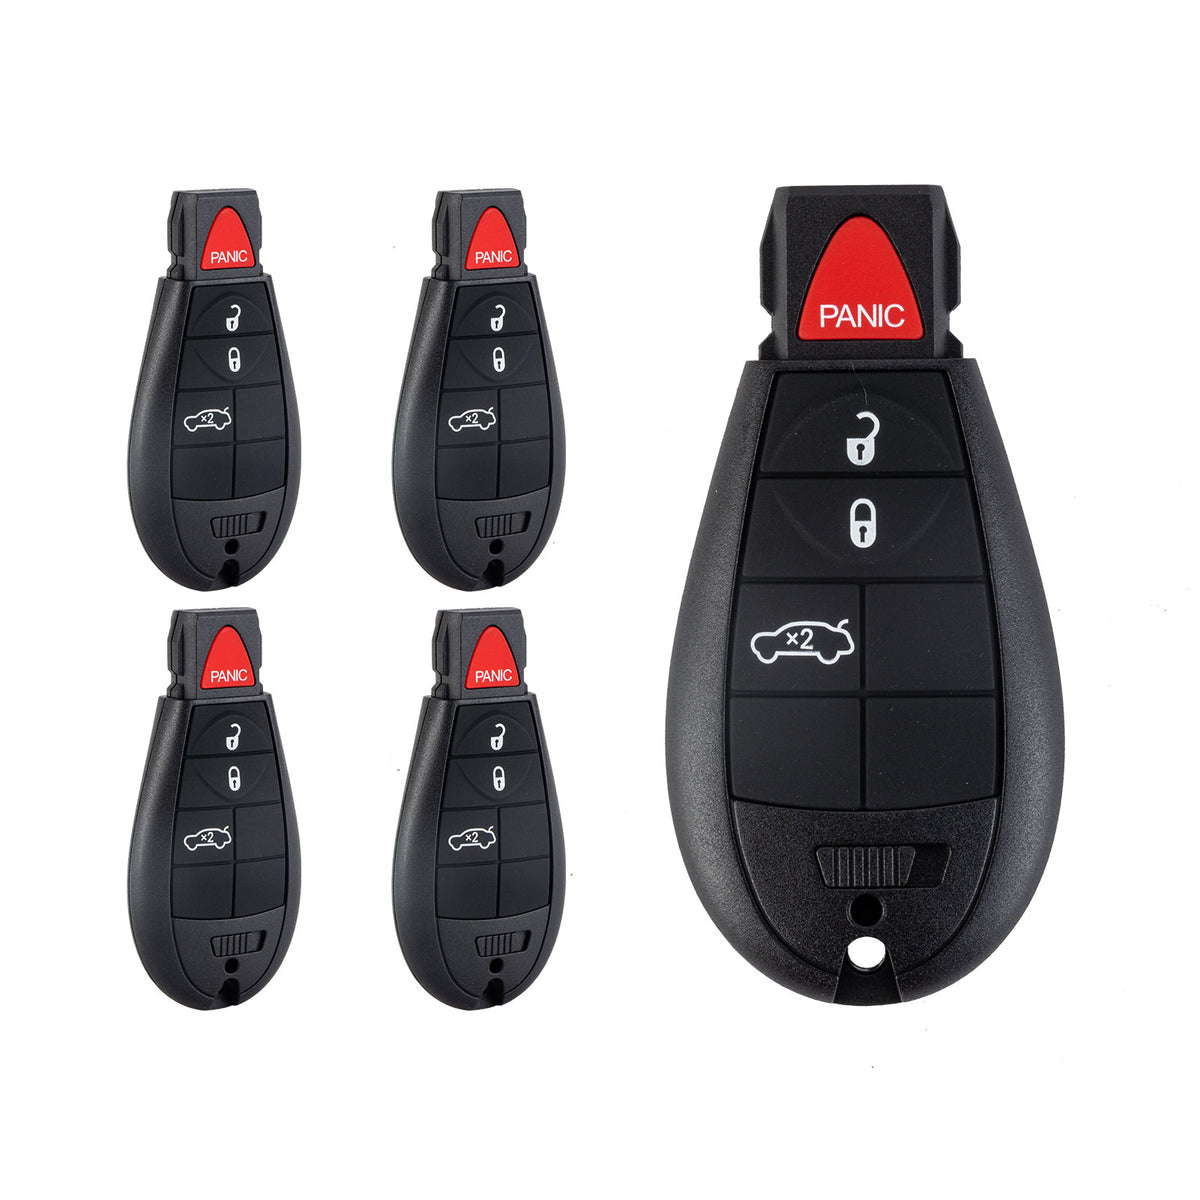 Car Key Fob Replacement for Dodge Charger Keyless Entry Control 4 Button IYZ-C01C or M3N5WY783X  KR-D4RA-05